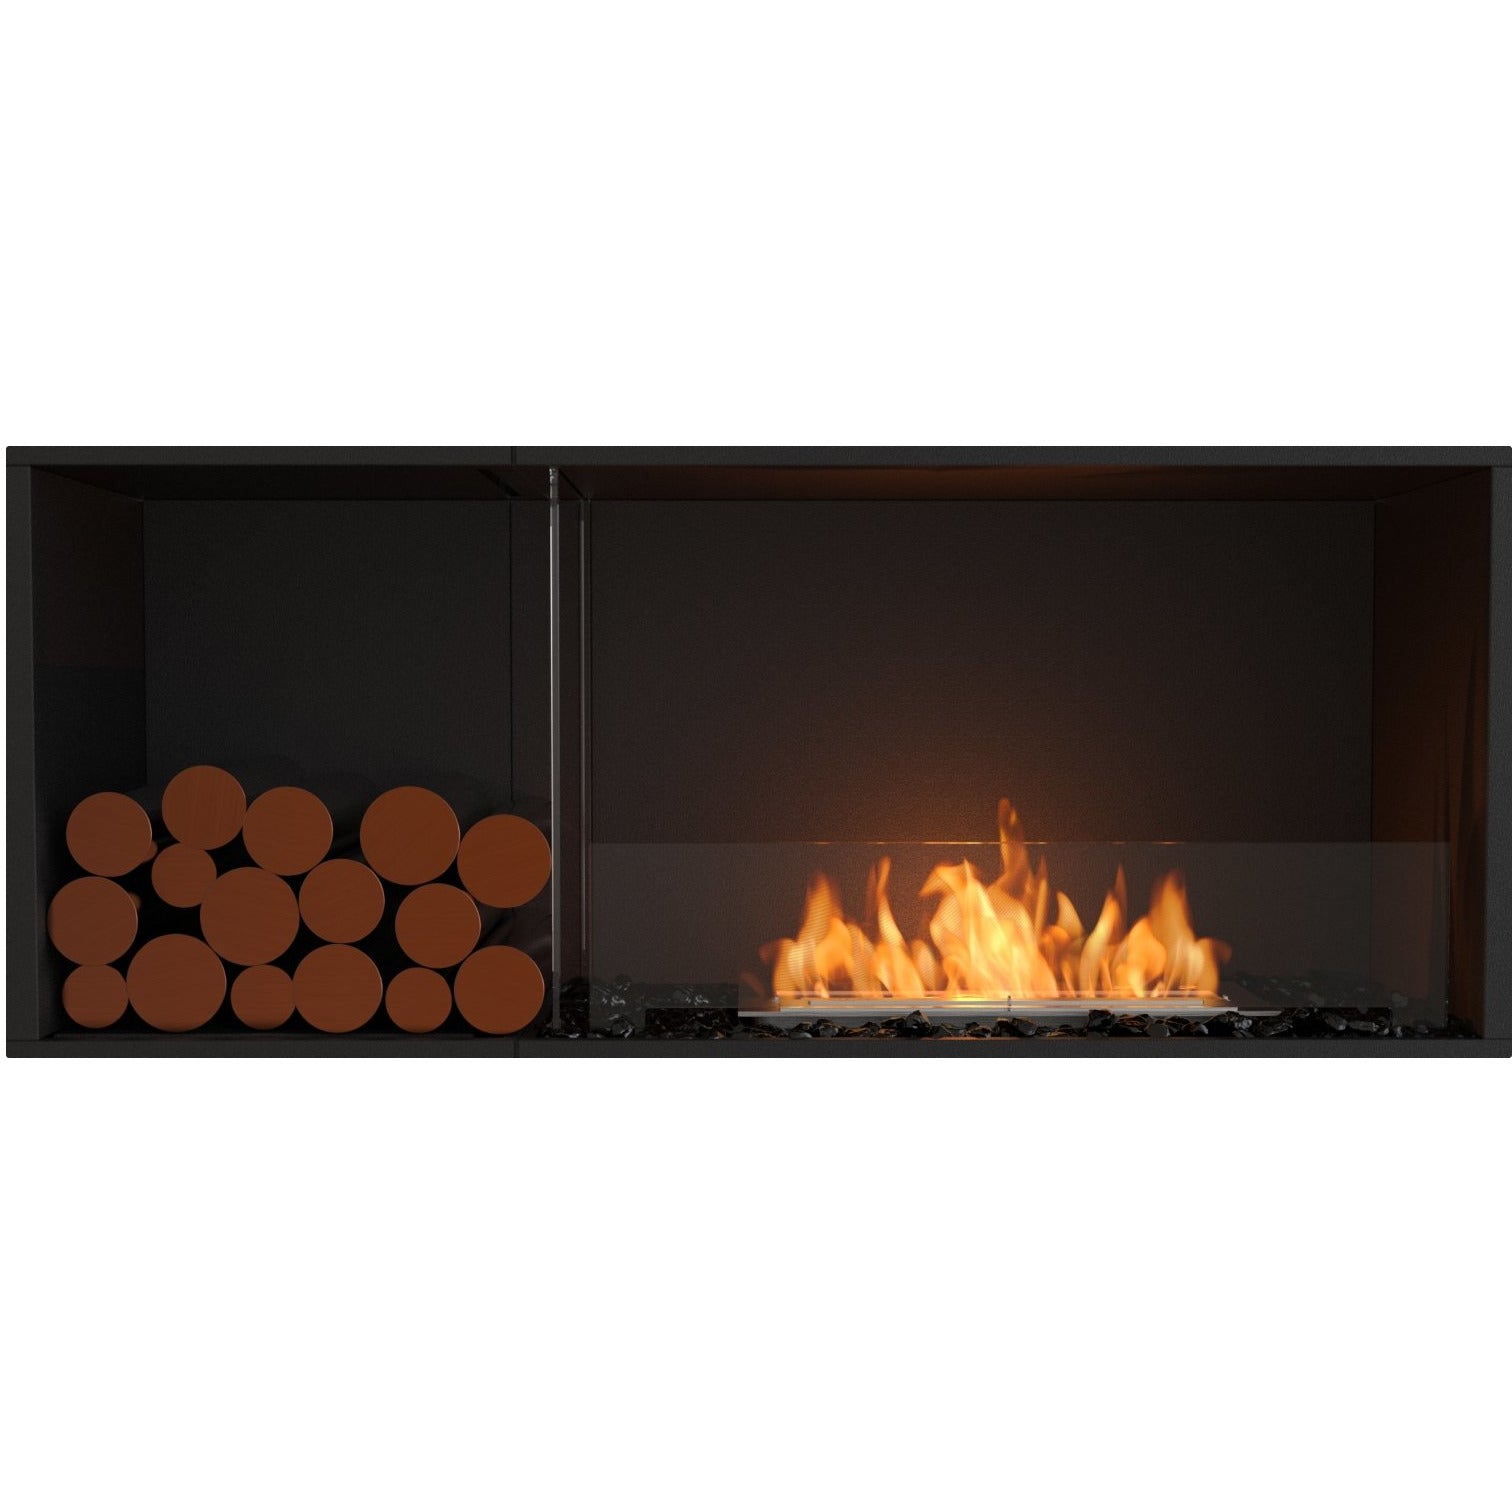 EcoSmart Flex 50ss with box left; Best quality bio ethanol wall fireplace in black for sale